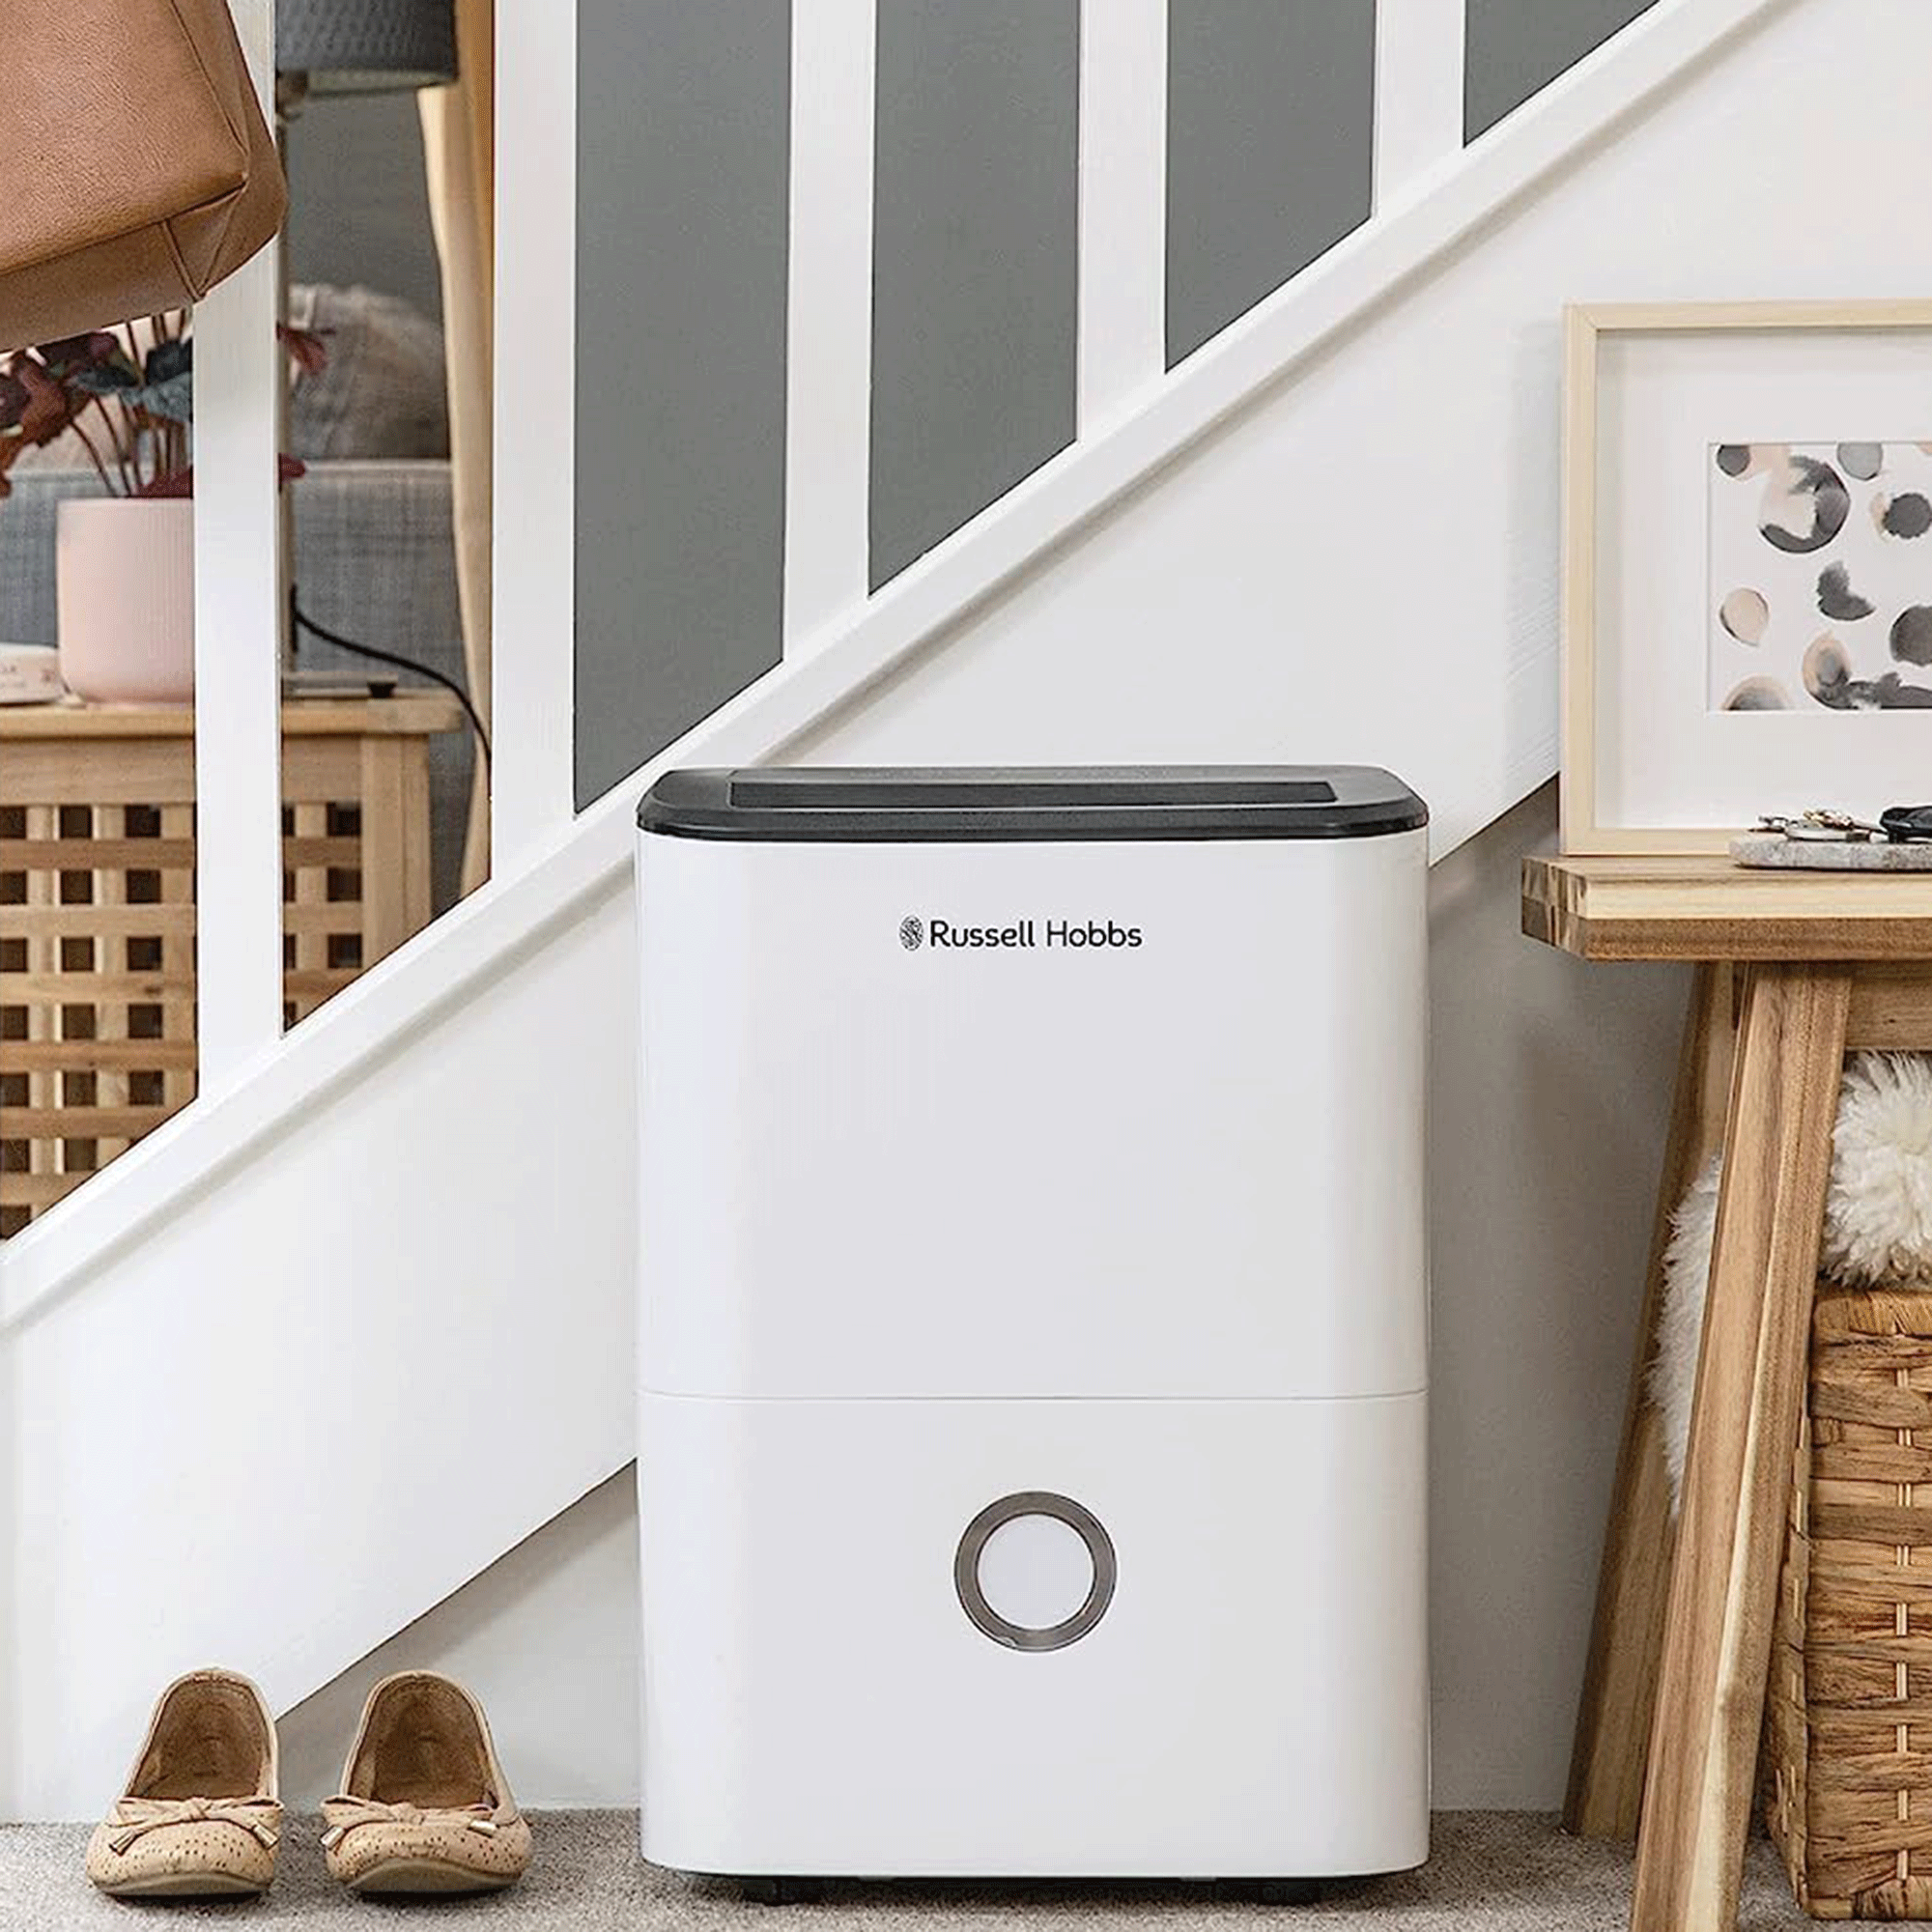 'It gets the job done' - This 20-litre dehumidifier has become an essential in my home